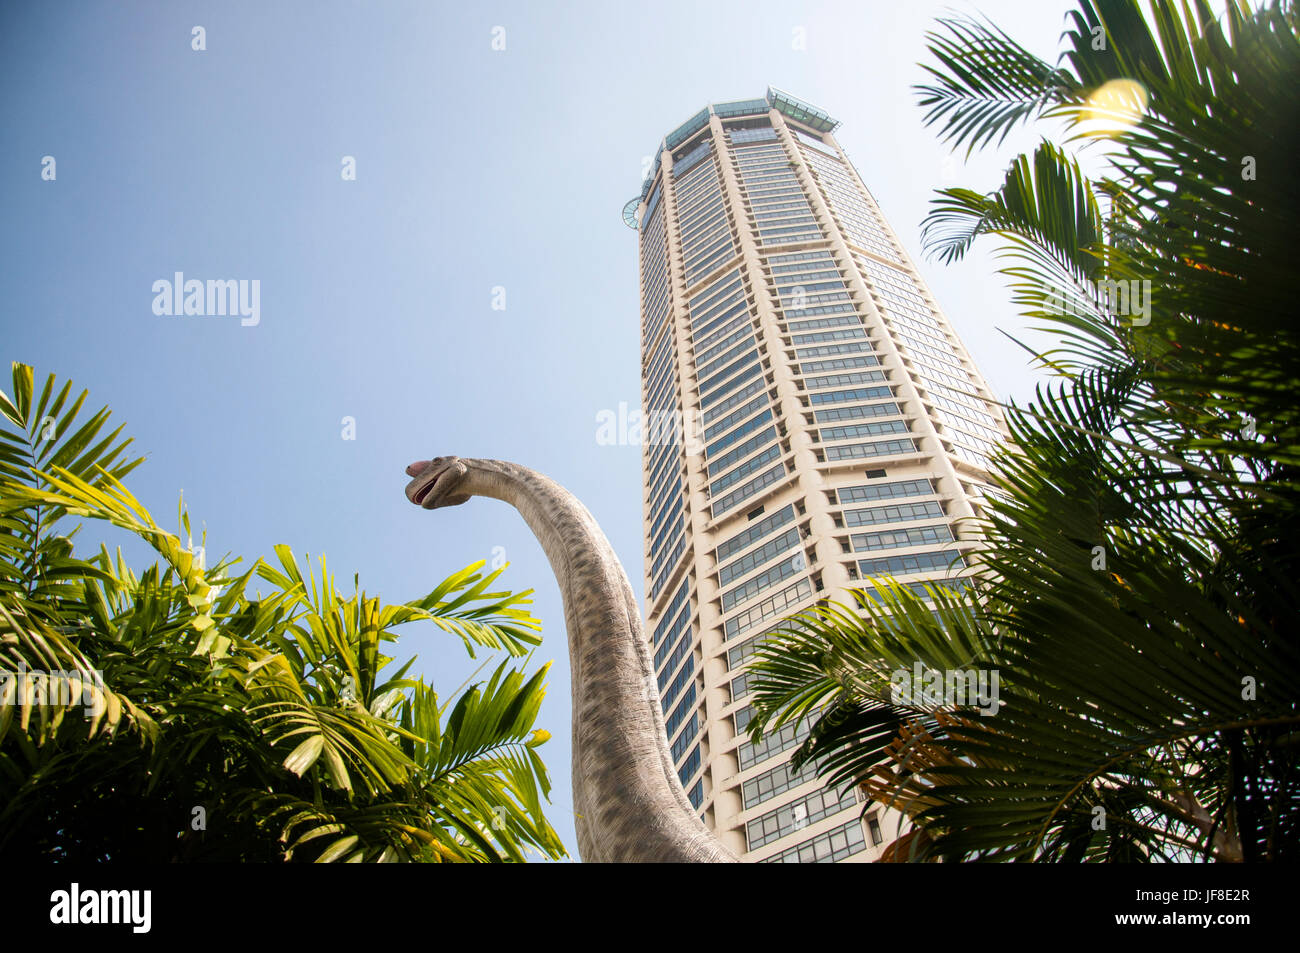 Jurassic Research Center - THE TOP Komtar Penang Stock Photo